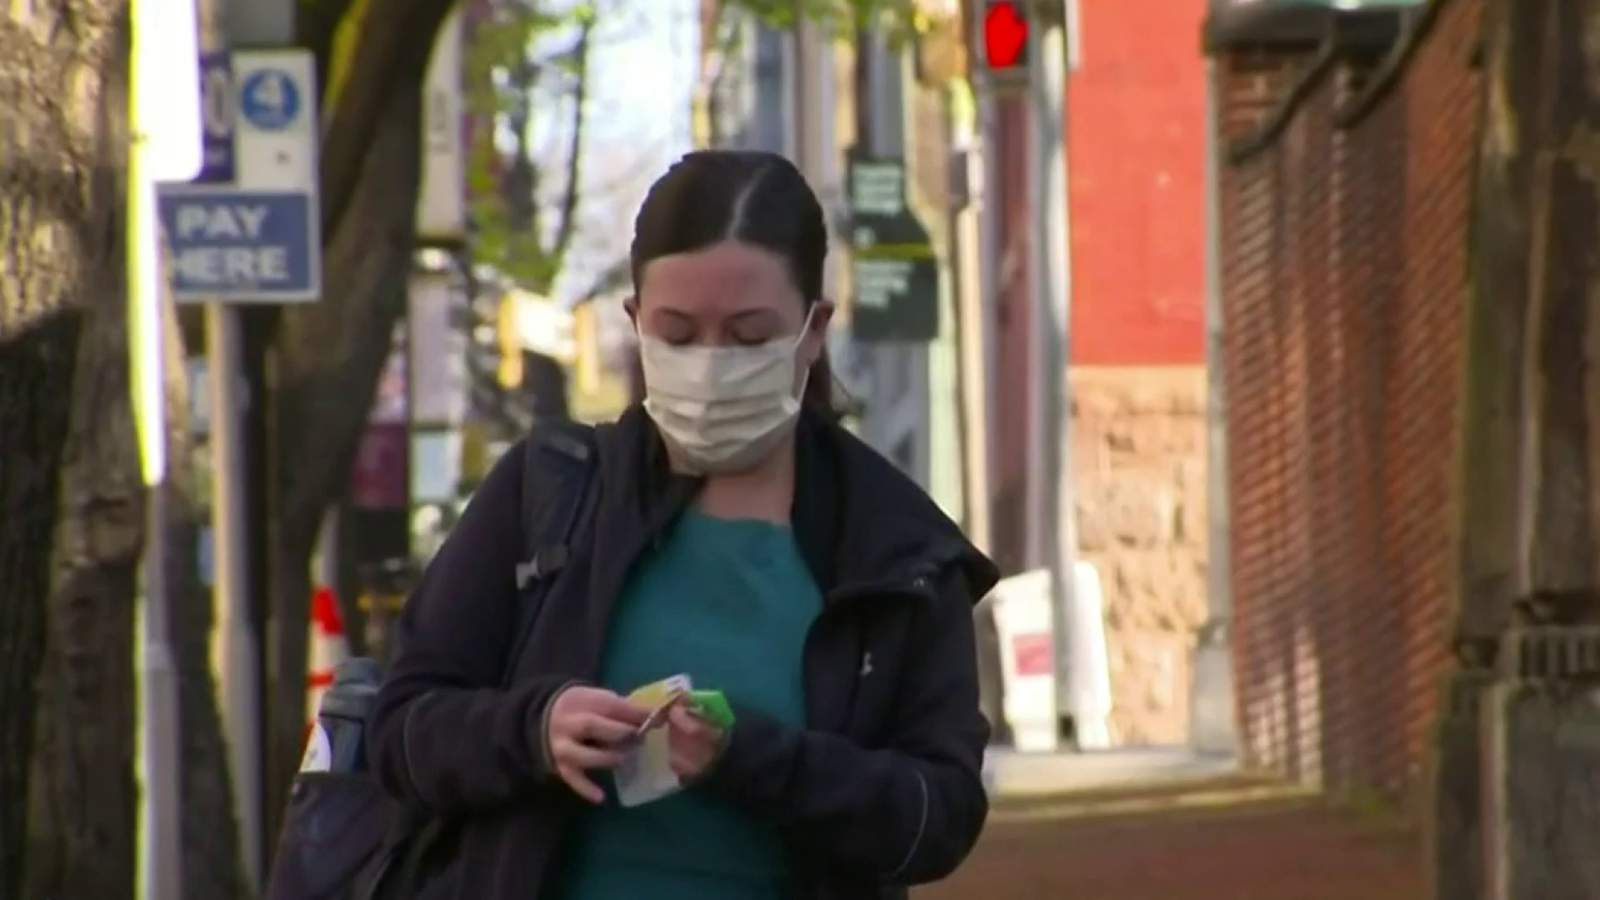 New studies confirm importance of mask use amid COVID pandemic